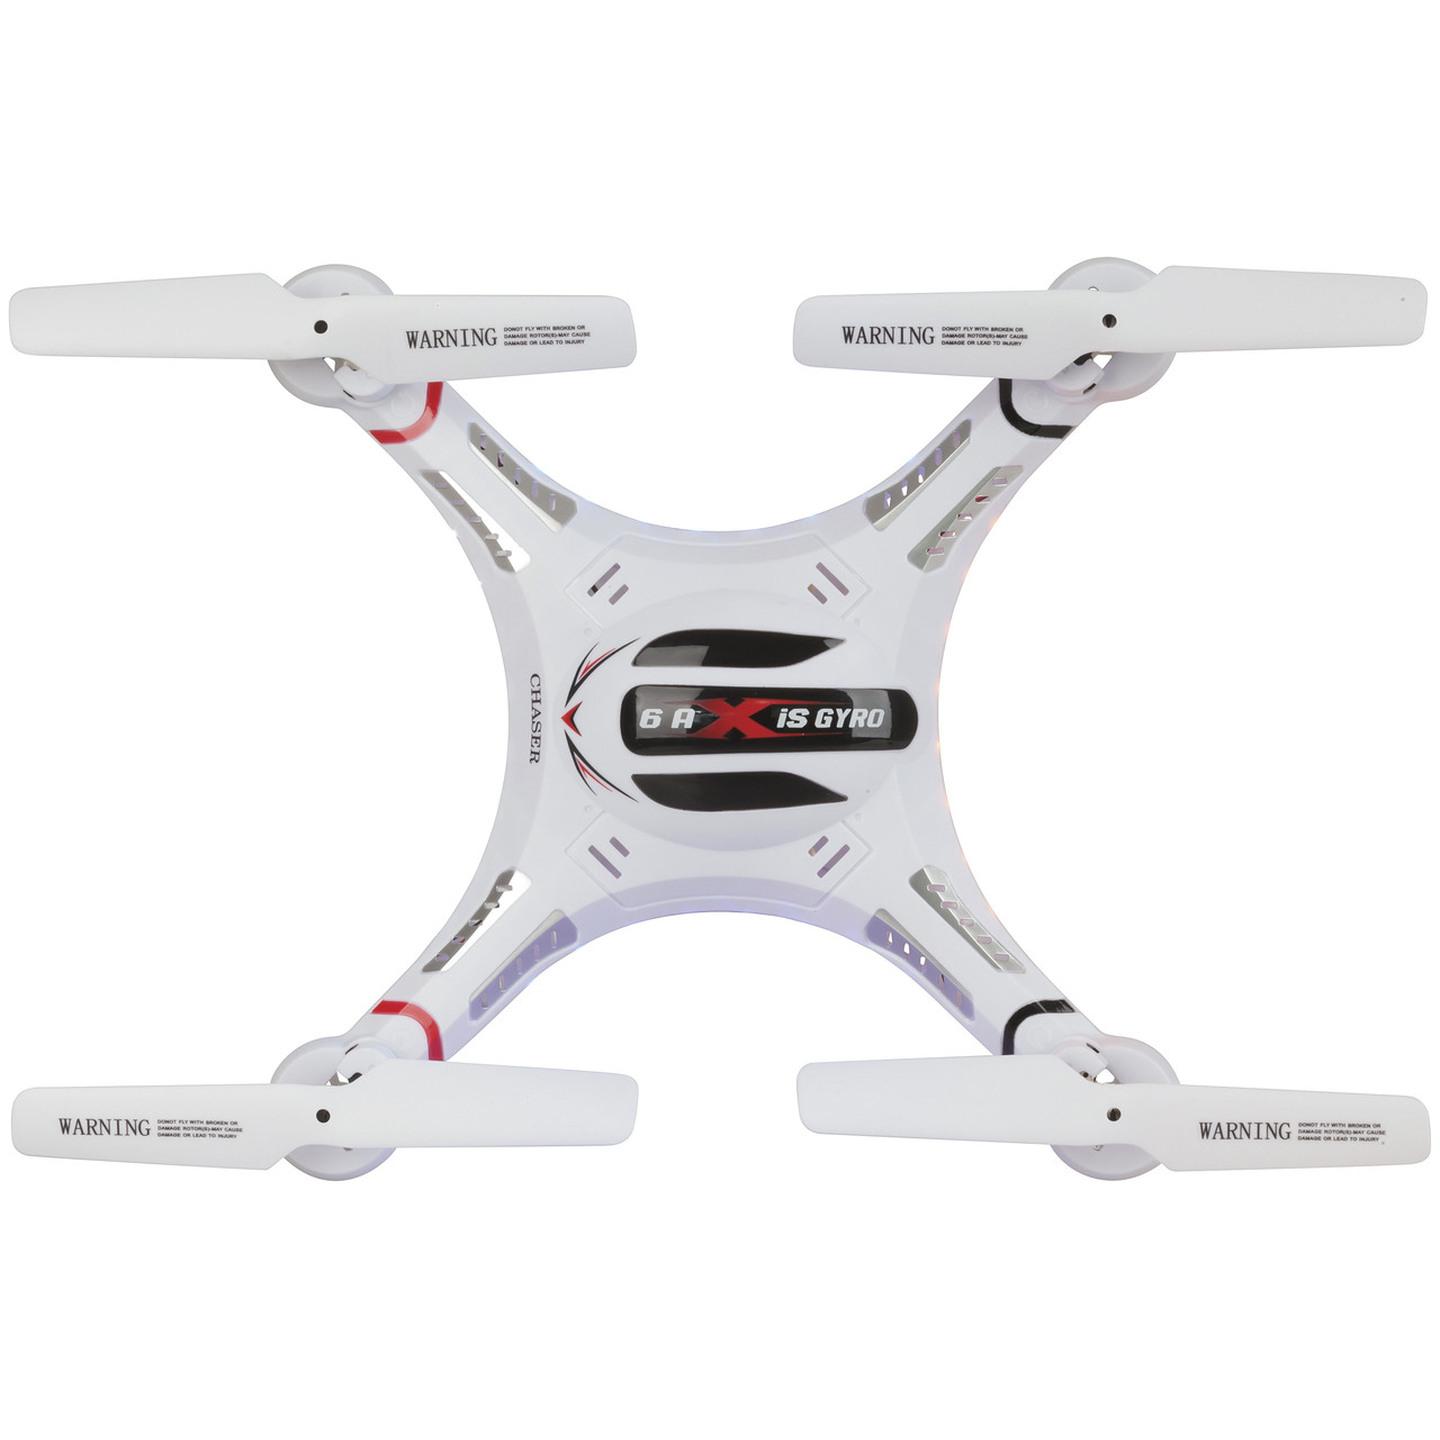 4 Channel Remote Control Quadcopter with 720p Camera